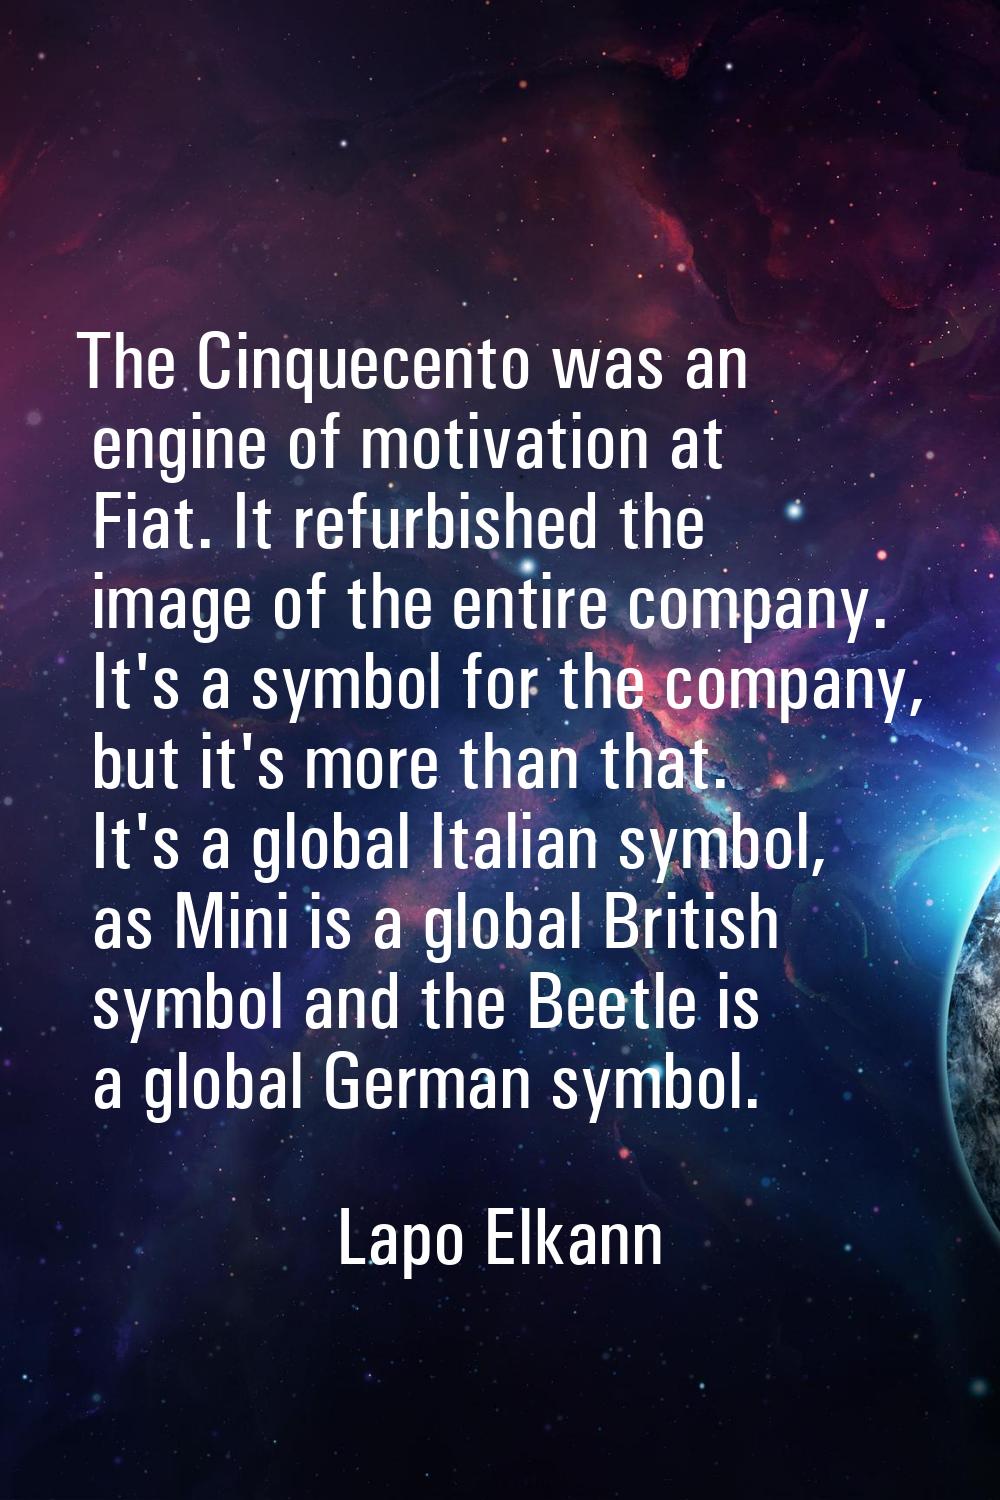 The Cinquecento was an engine of motivation at Fiat. It refurbished the image of the entire company